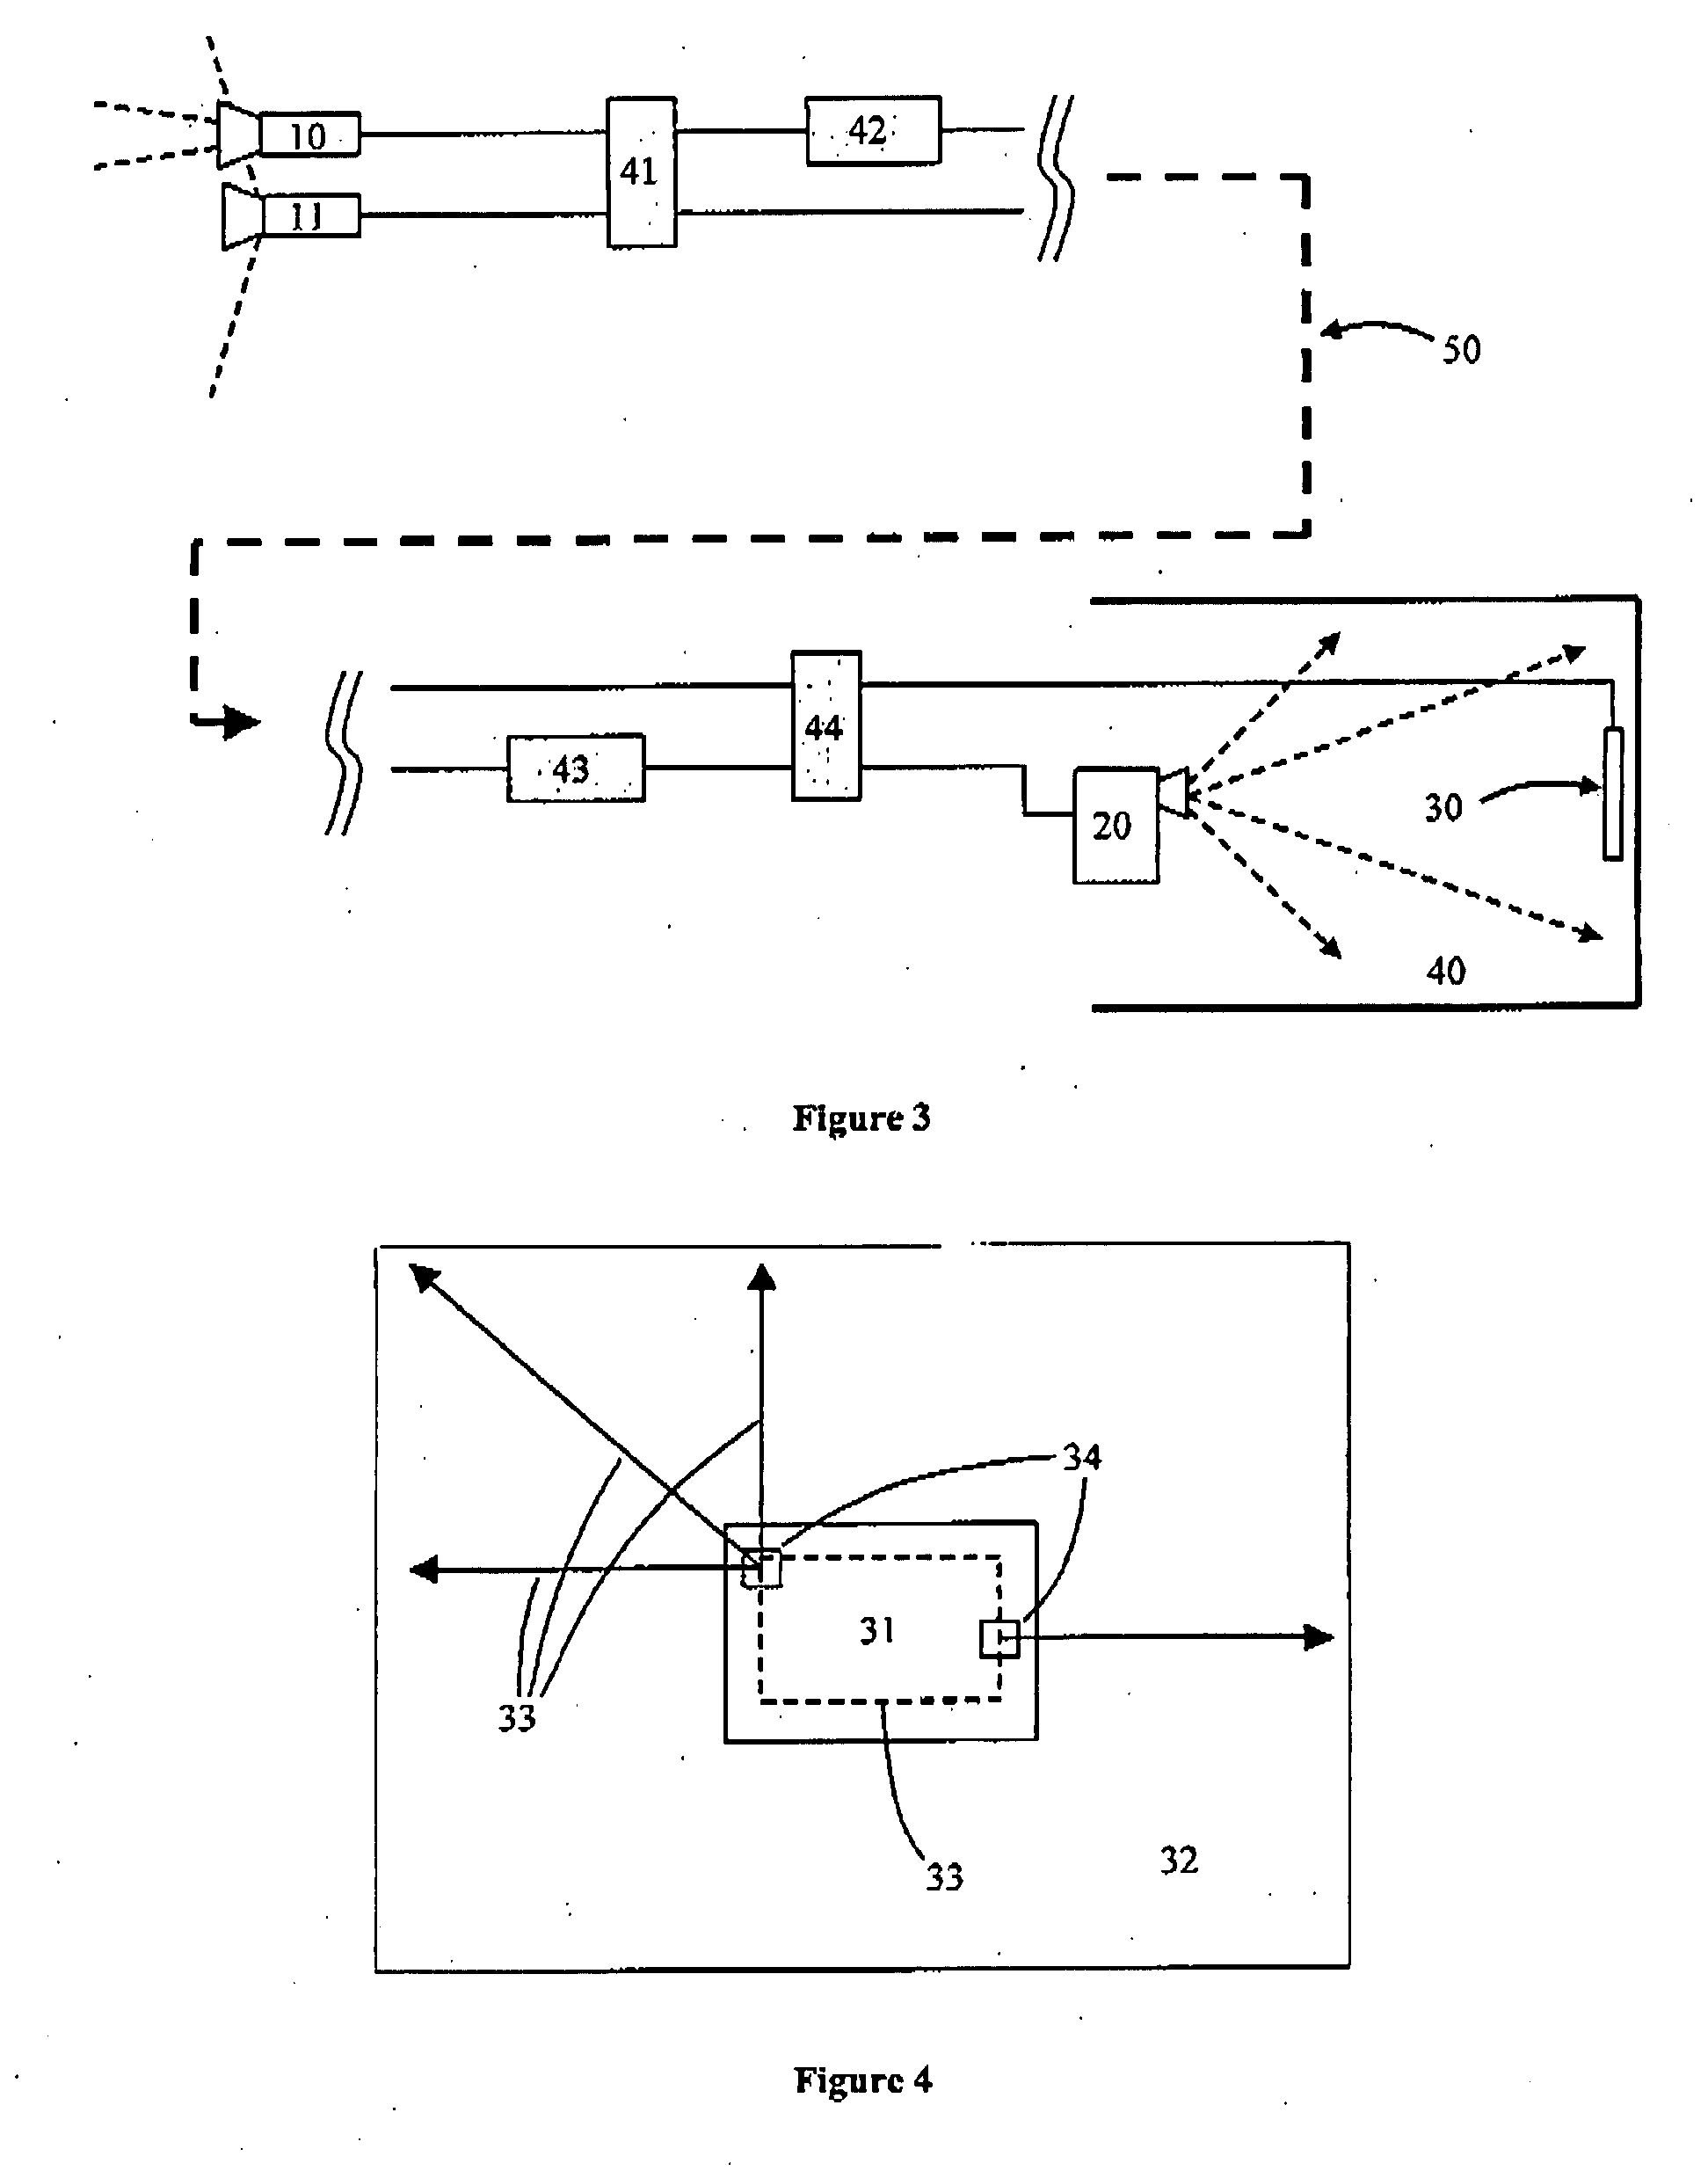 System and method for video processing and display